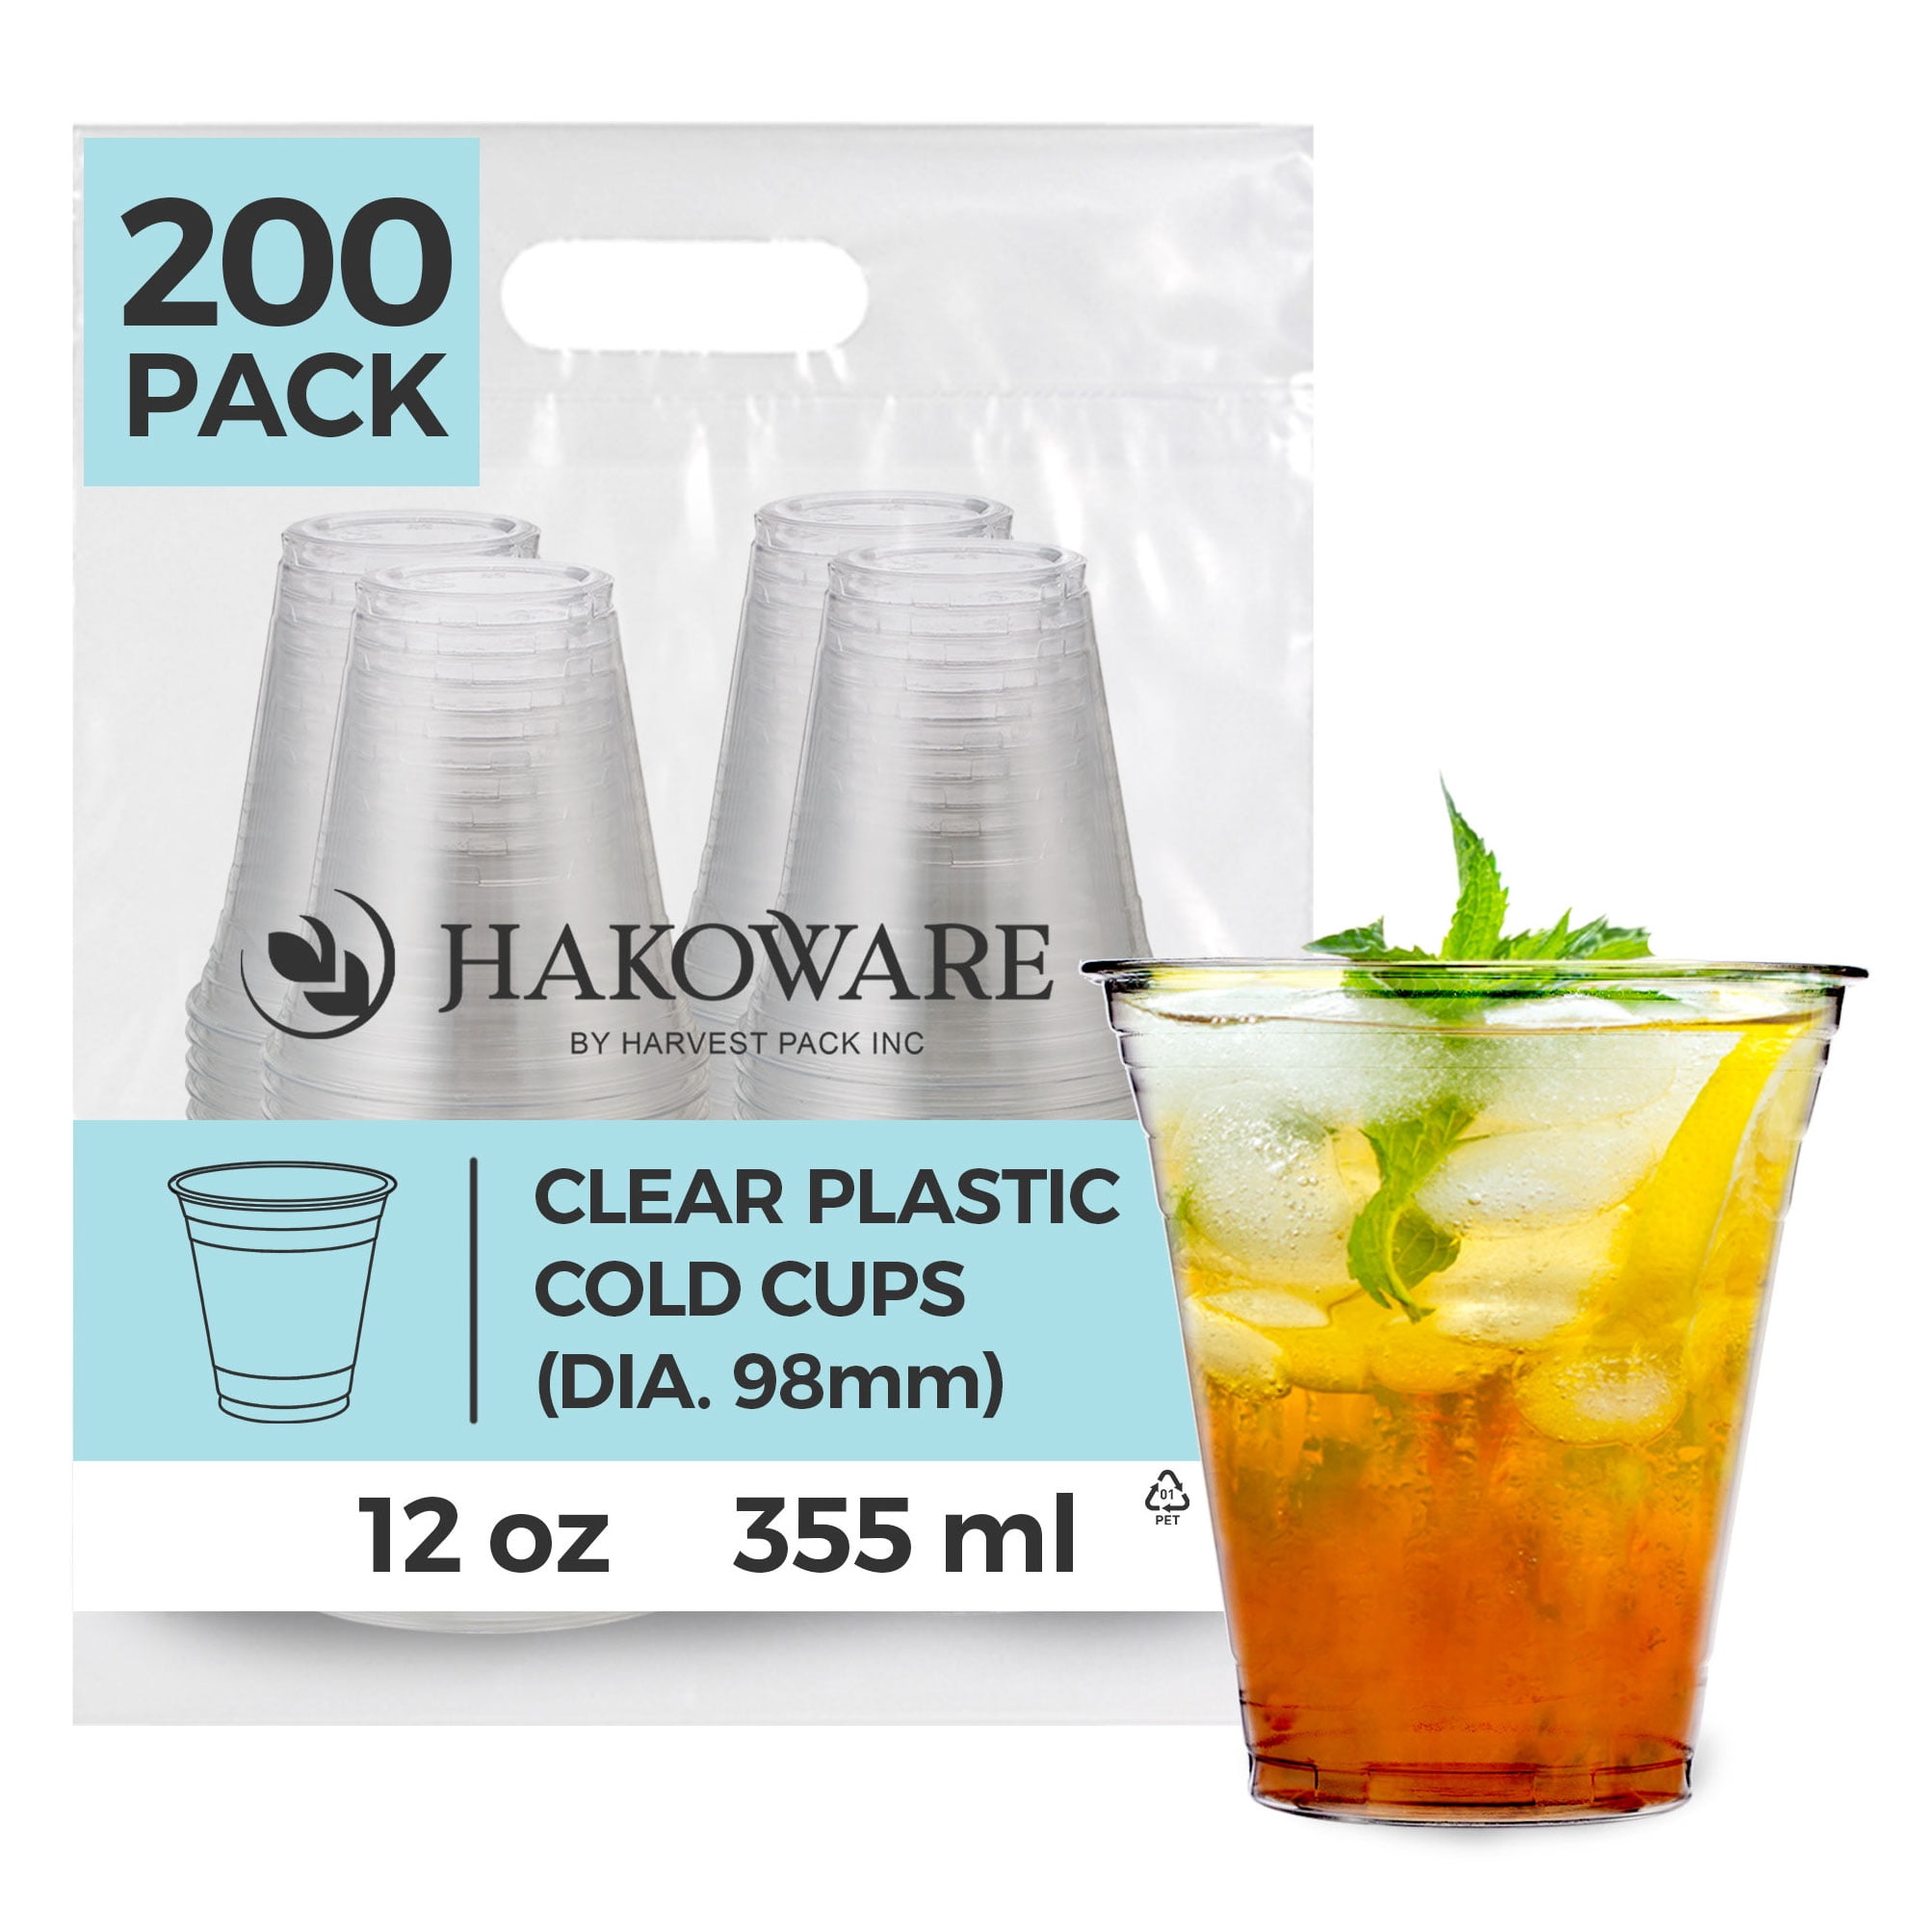 VCKK [100 Sets 12oz Crystal Clear Disposable Plastic Cups with Straws and Lids, to Go Cups for Iced Coffee, Smoothie, Milkshake, Lemonade, Cold